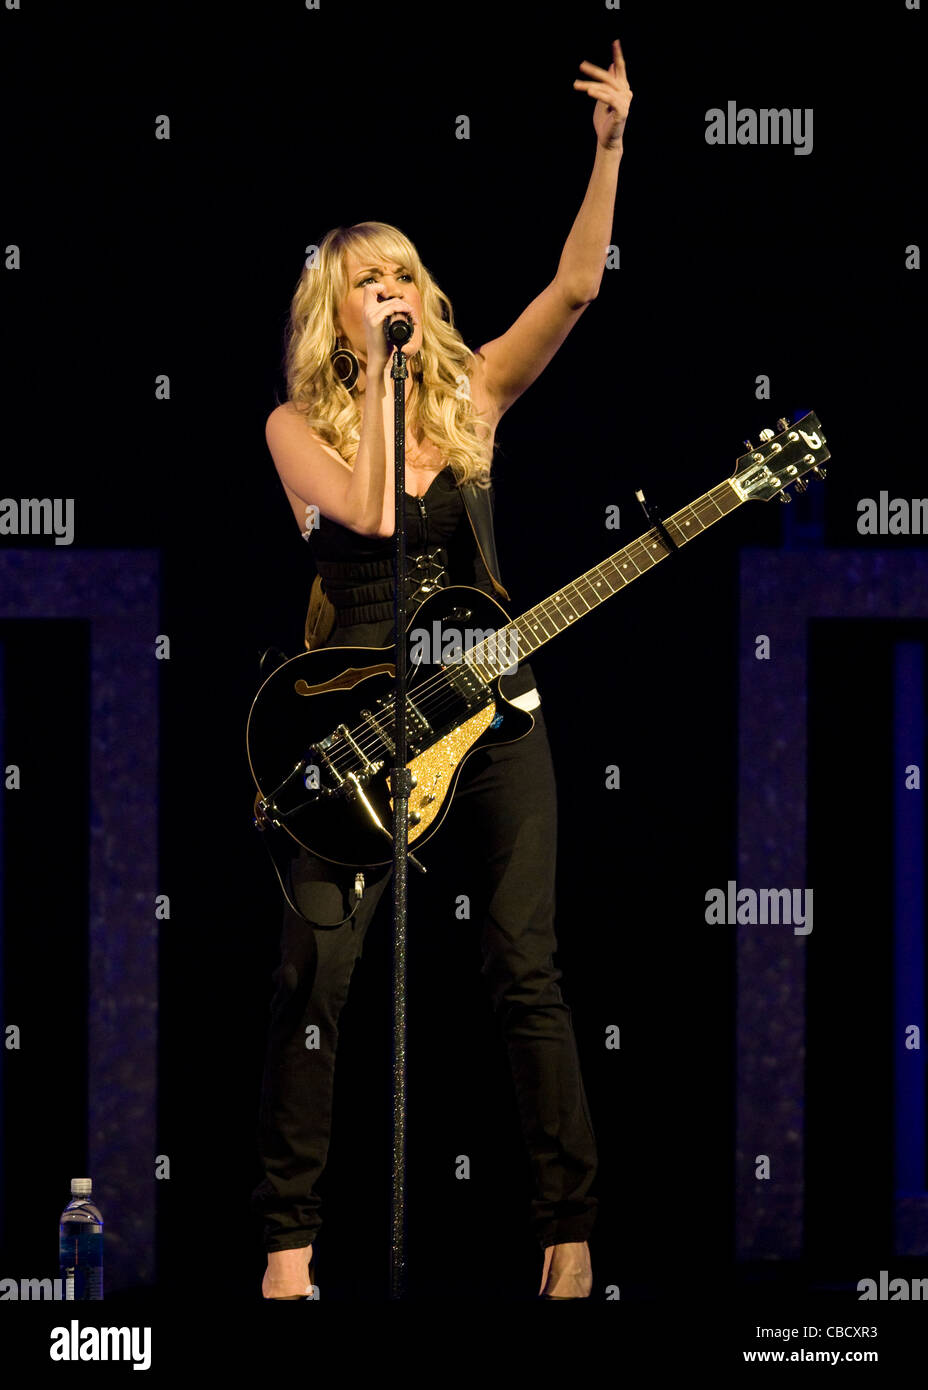 Country music recording artist Carrie Underwood performing in concert. Stock Photo